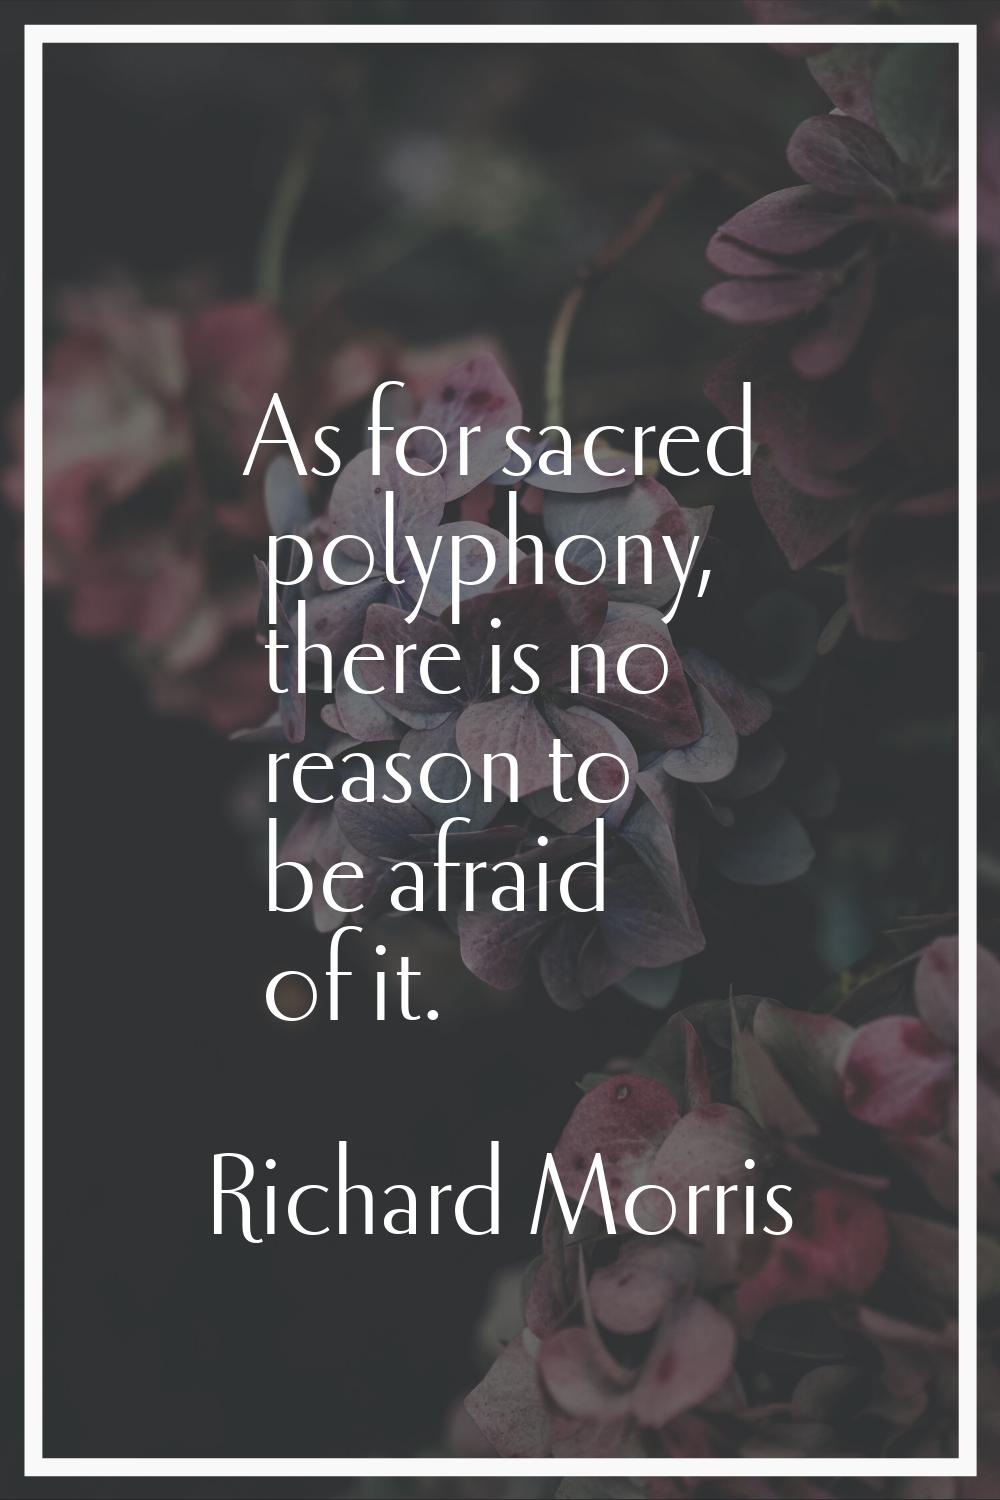 As for sacred polyphony, there is no reason to be afraid of it.